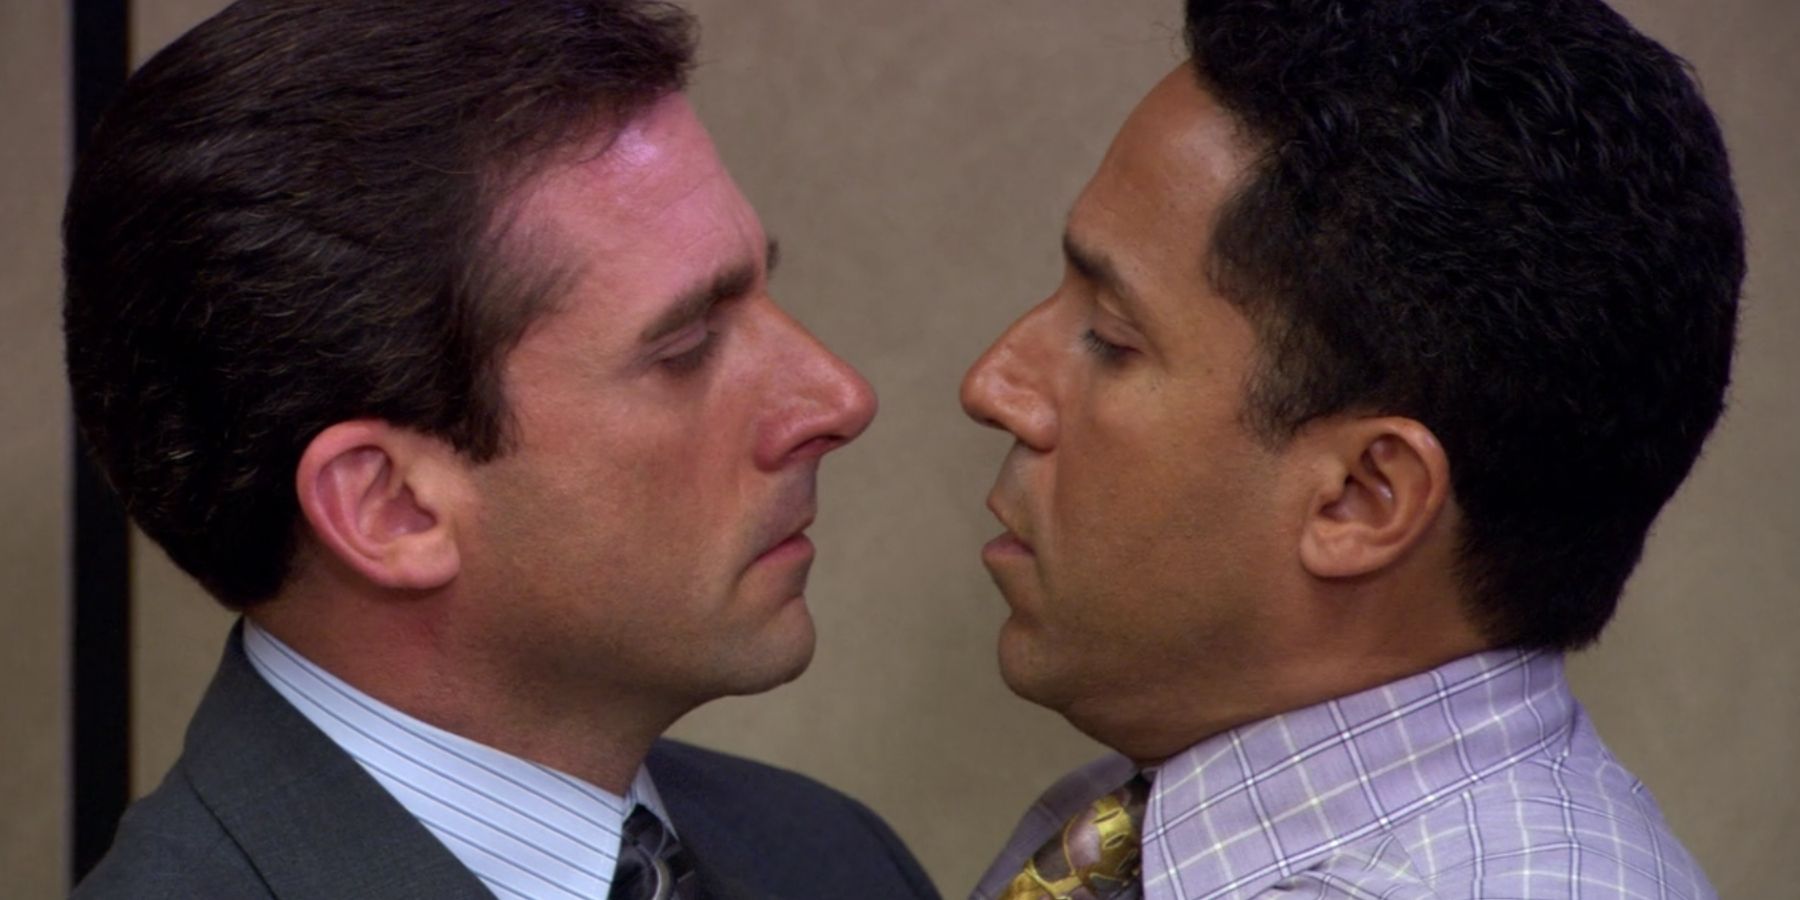 Michael kisses Oscar in The Office